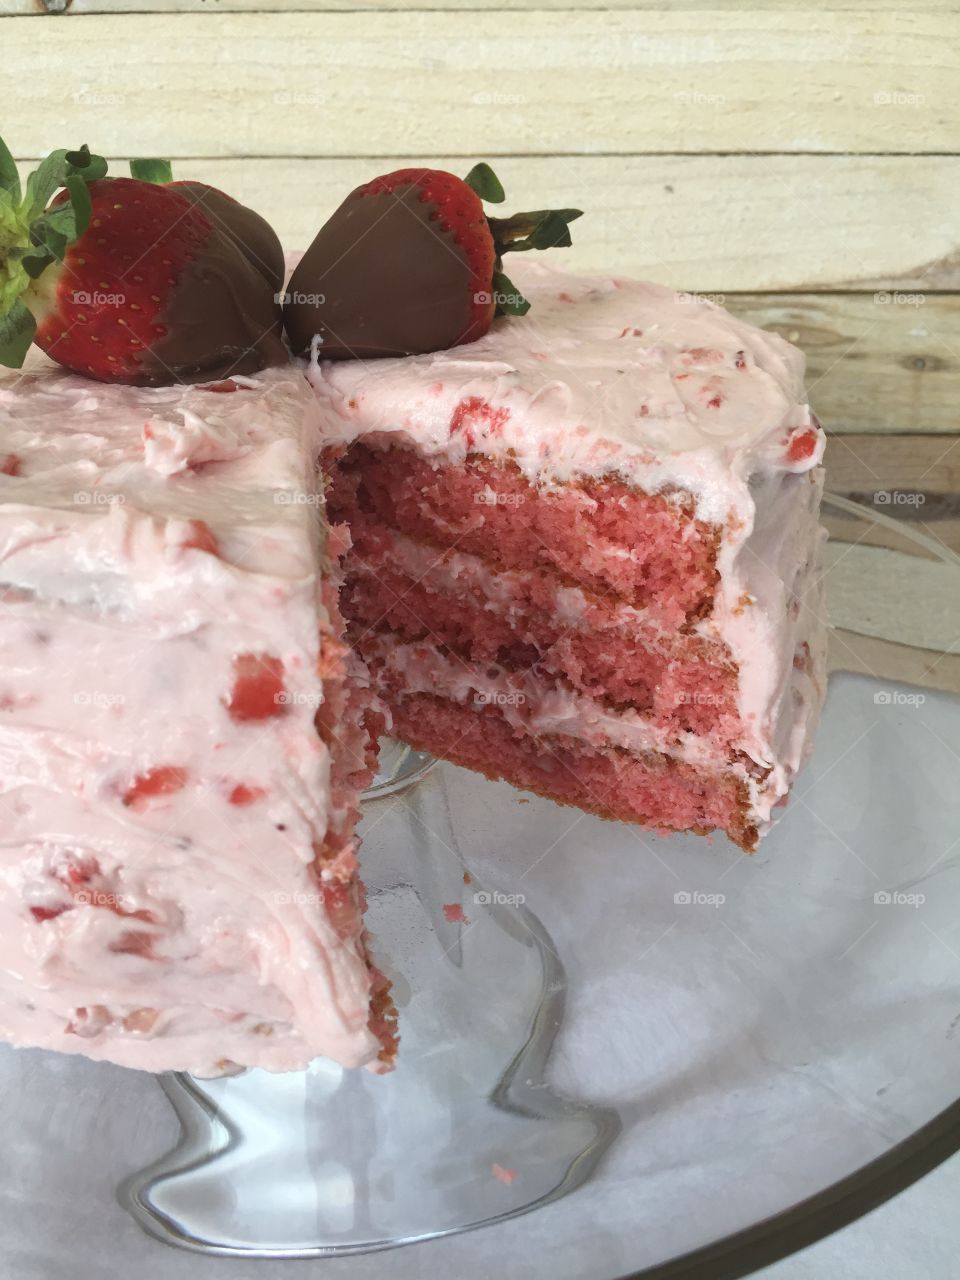 Strawberry triple layer cake with strawberry buttercream frosting